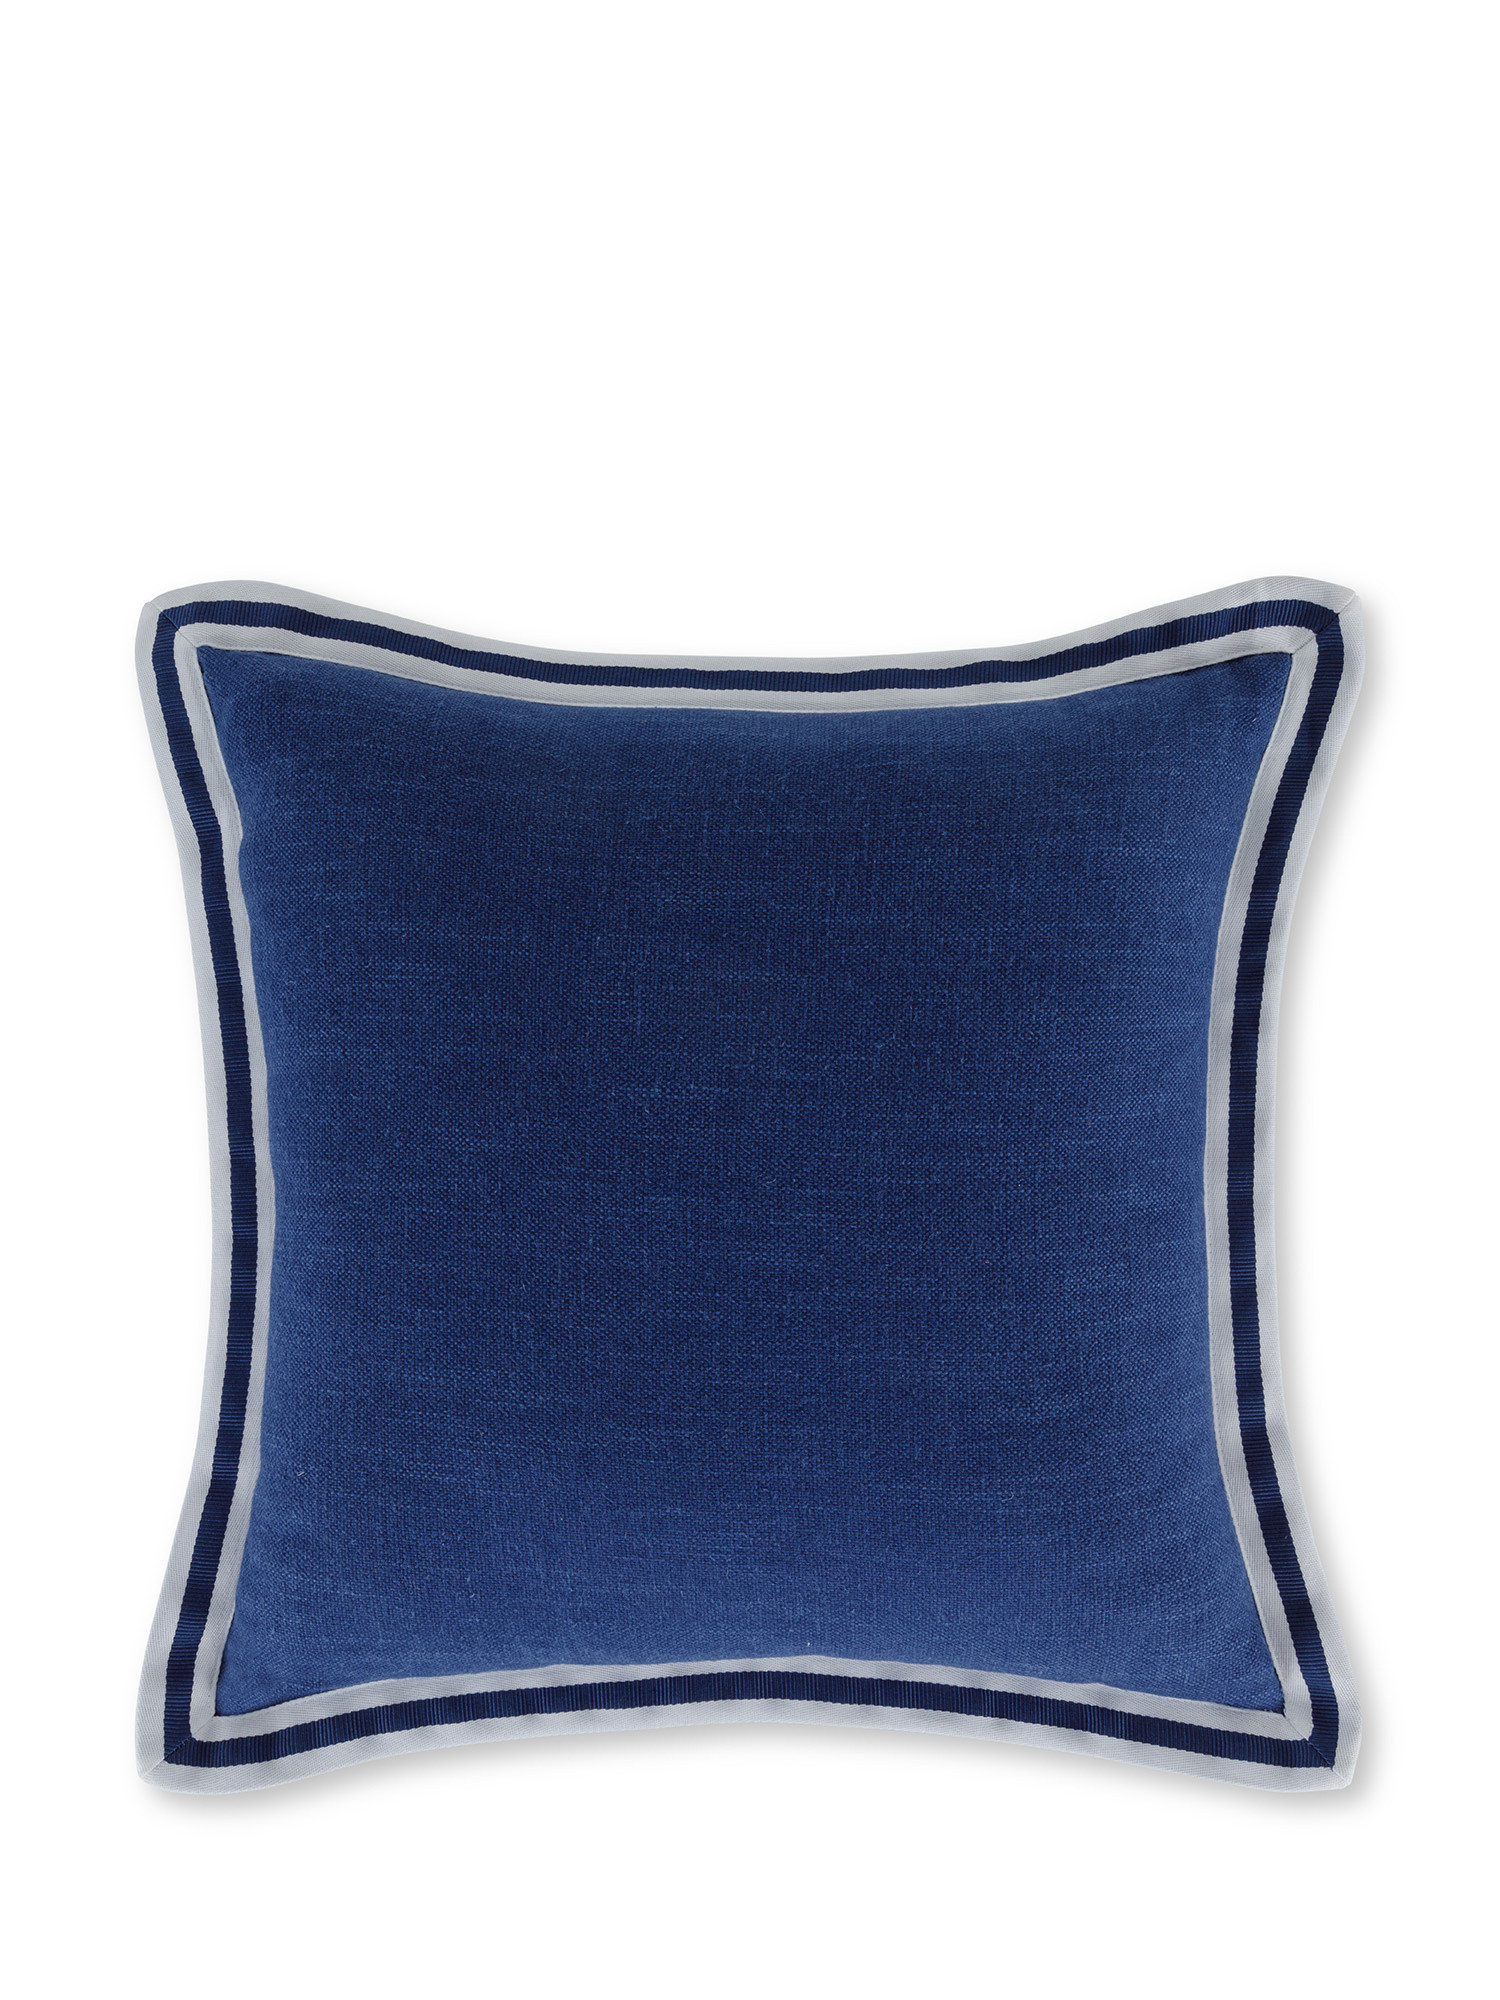 Cushion with striped border 45x45 cm, Blue, large image number 0